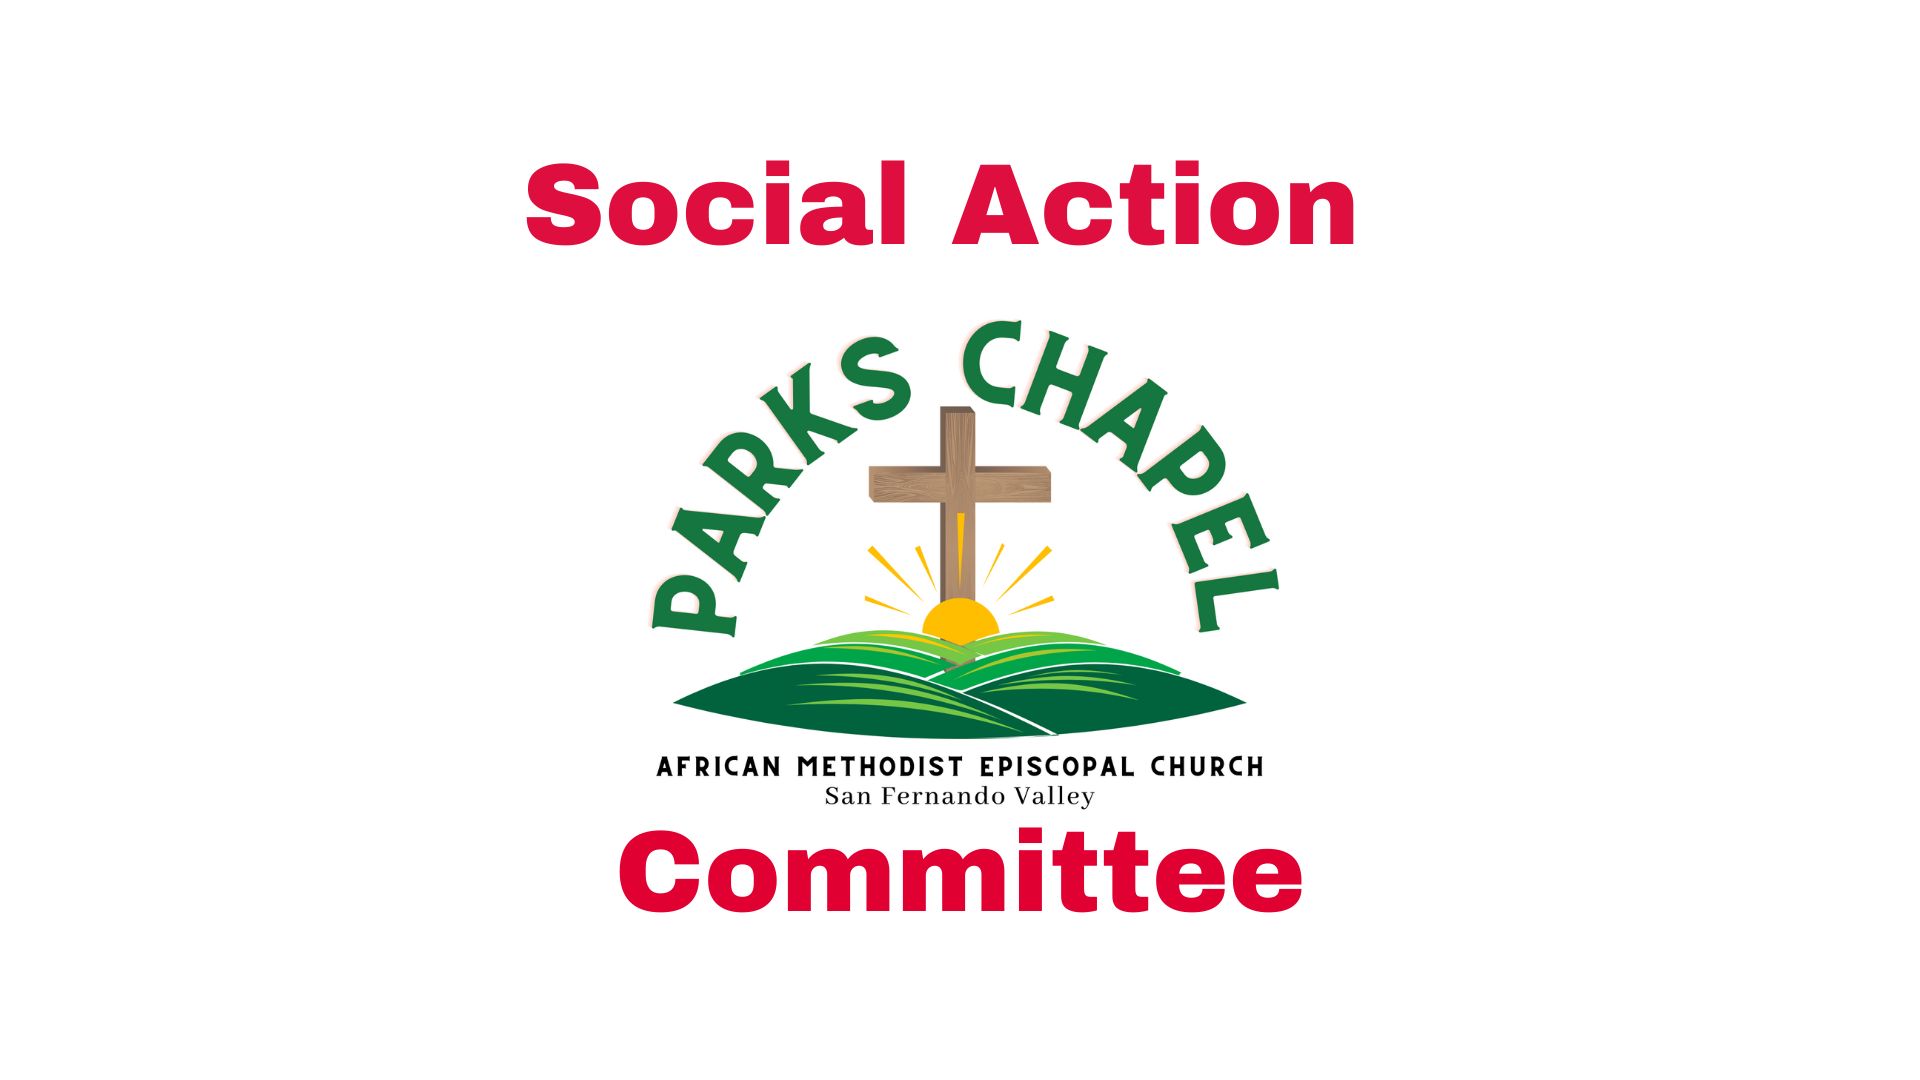 Social Action Committee Ministry